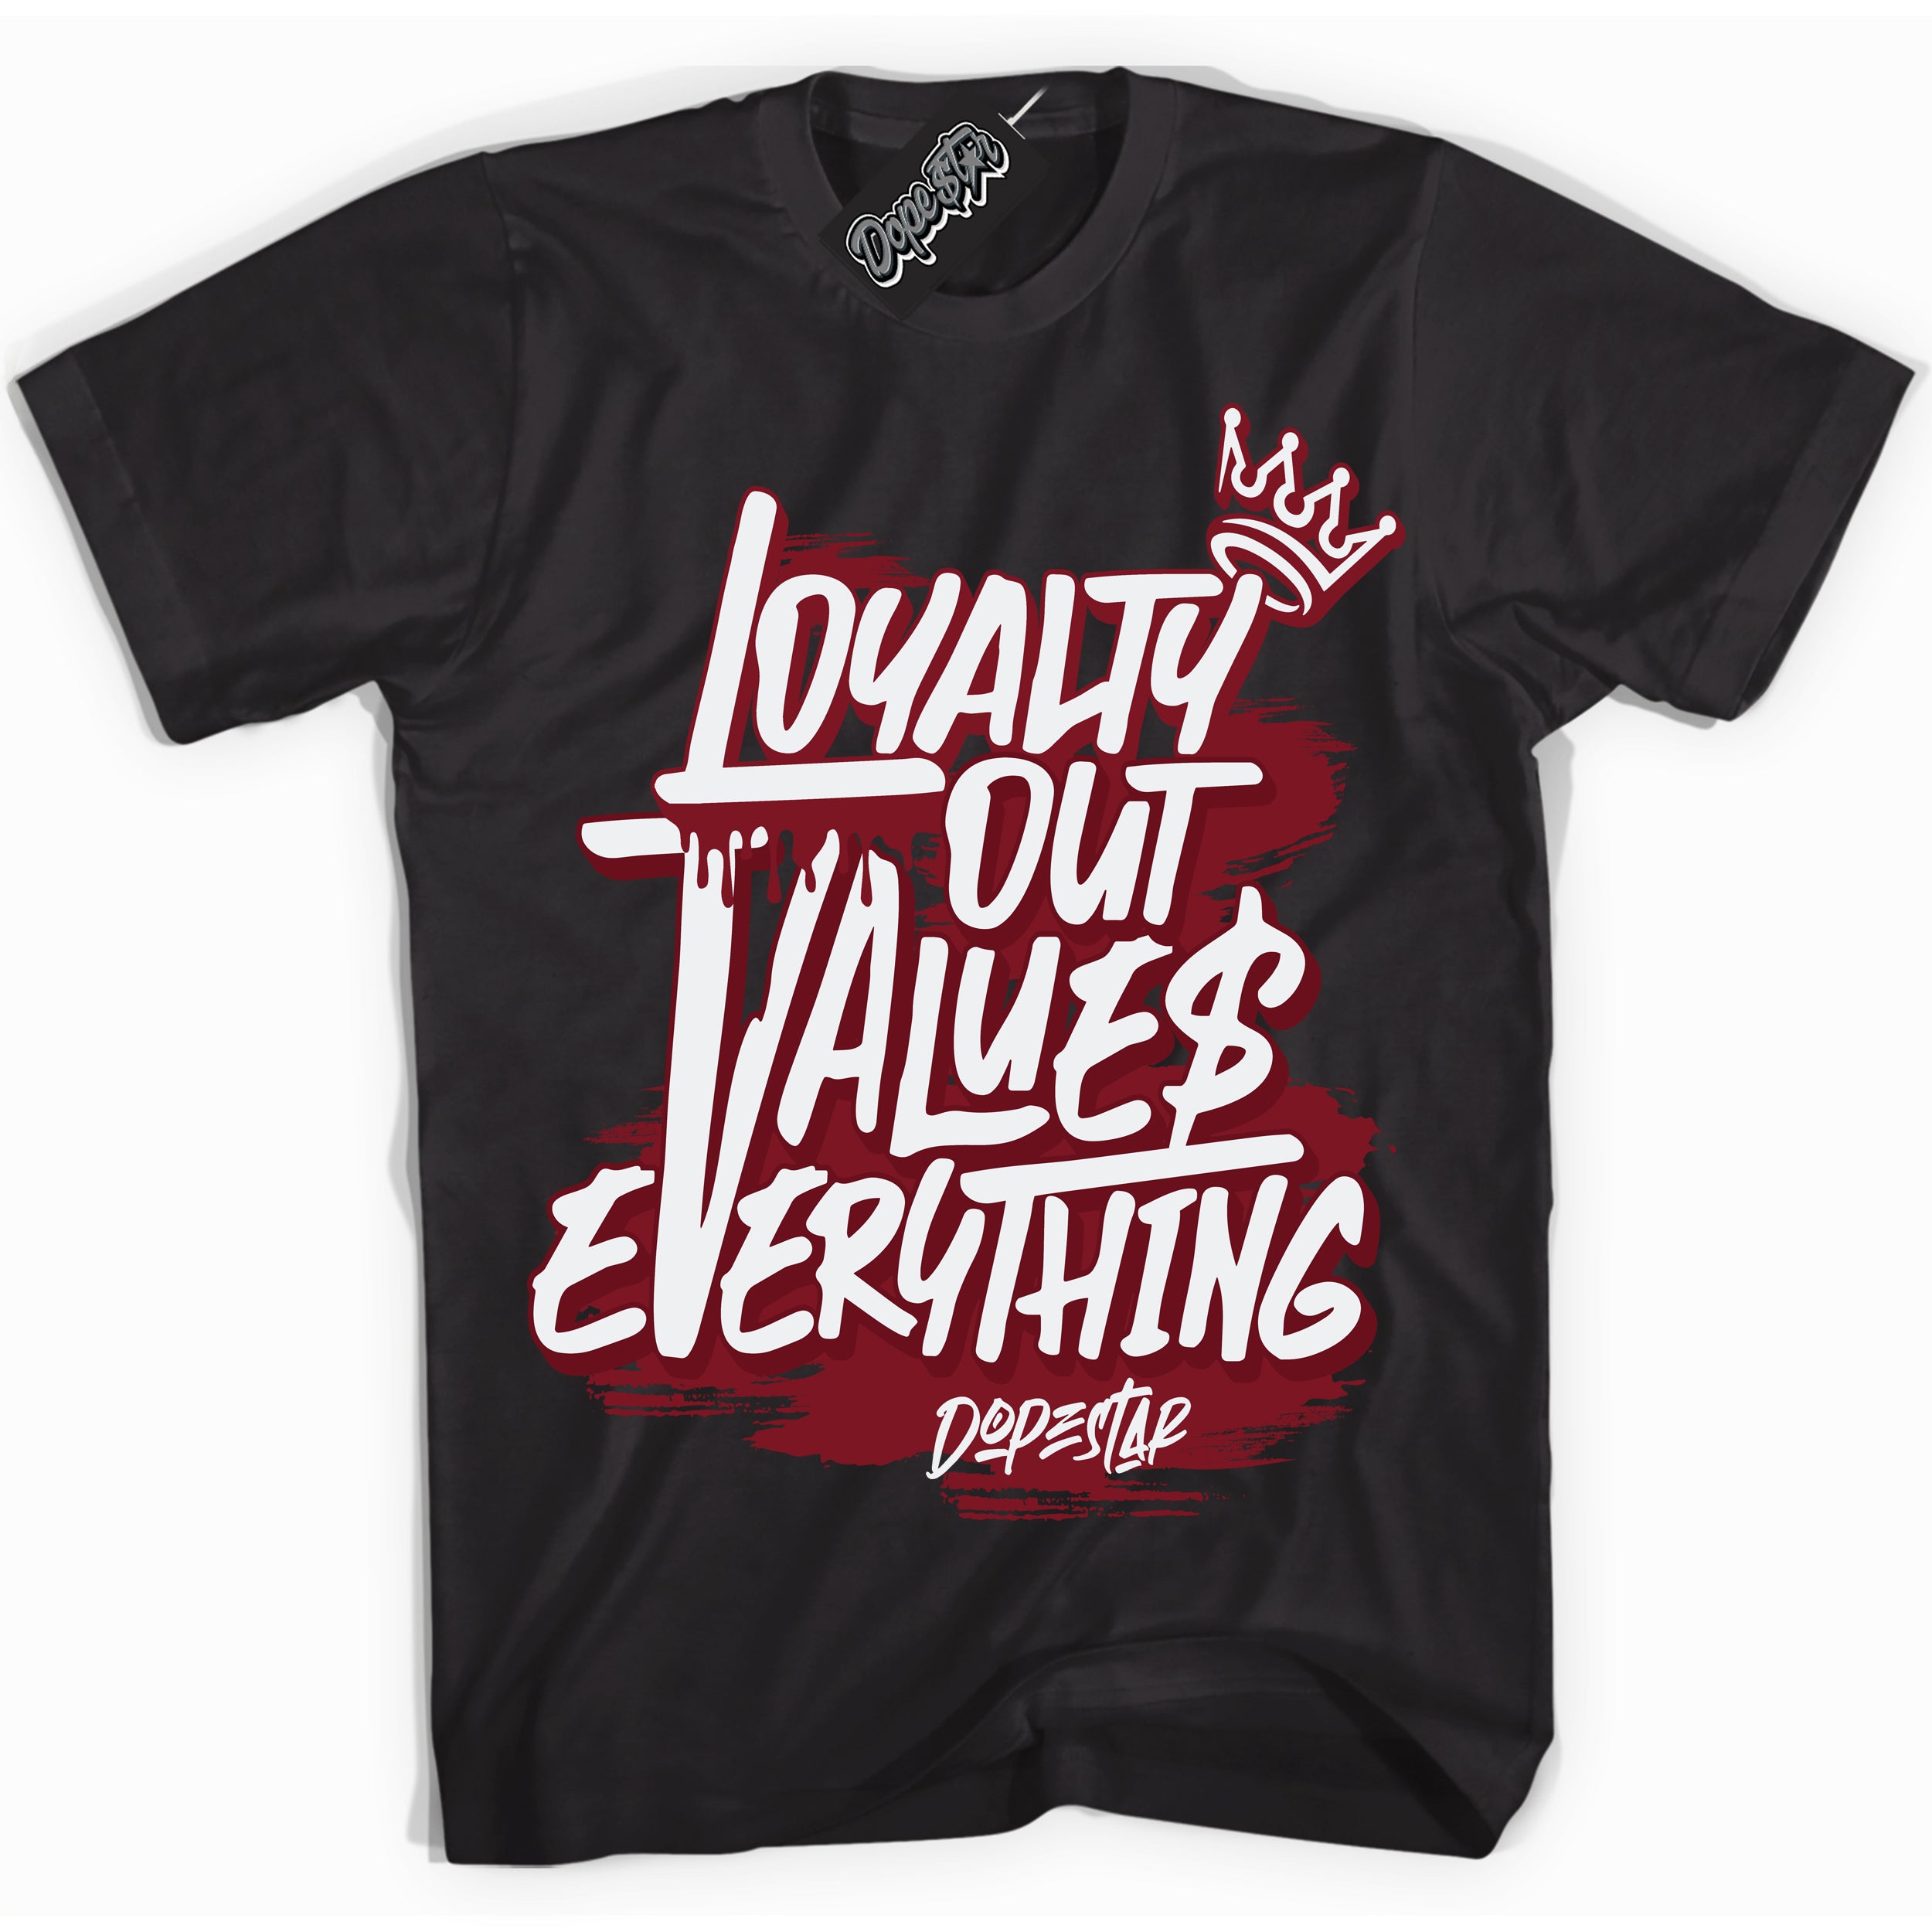 Cool Black Shirt with “ Loyalty Out Values Everything” design that perfectly matches Metallic Burgundy 1s Sneakers.